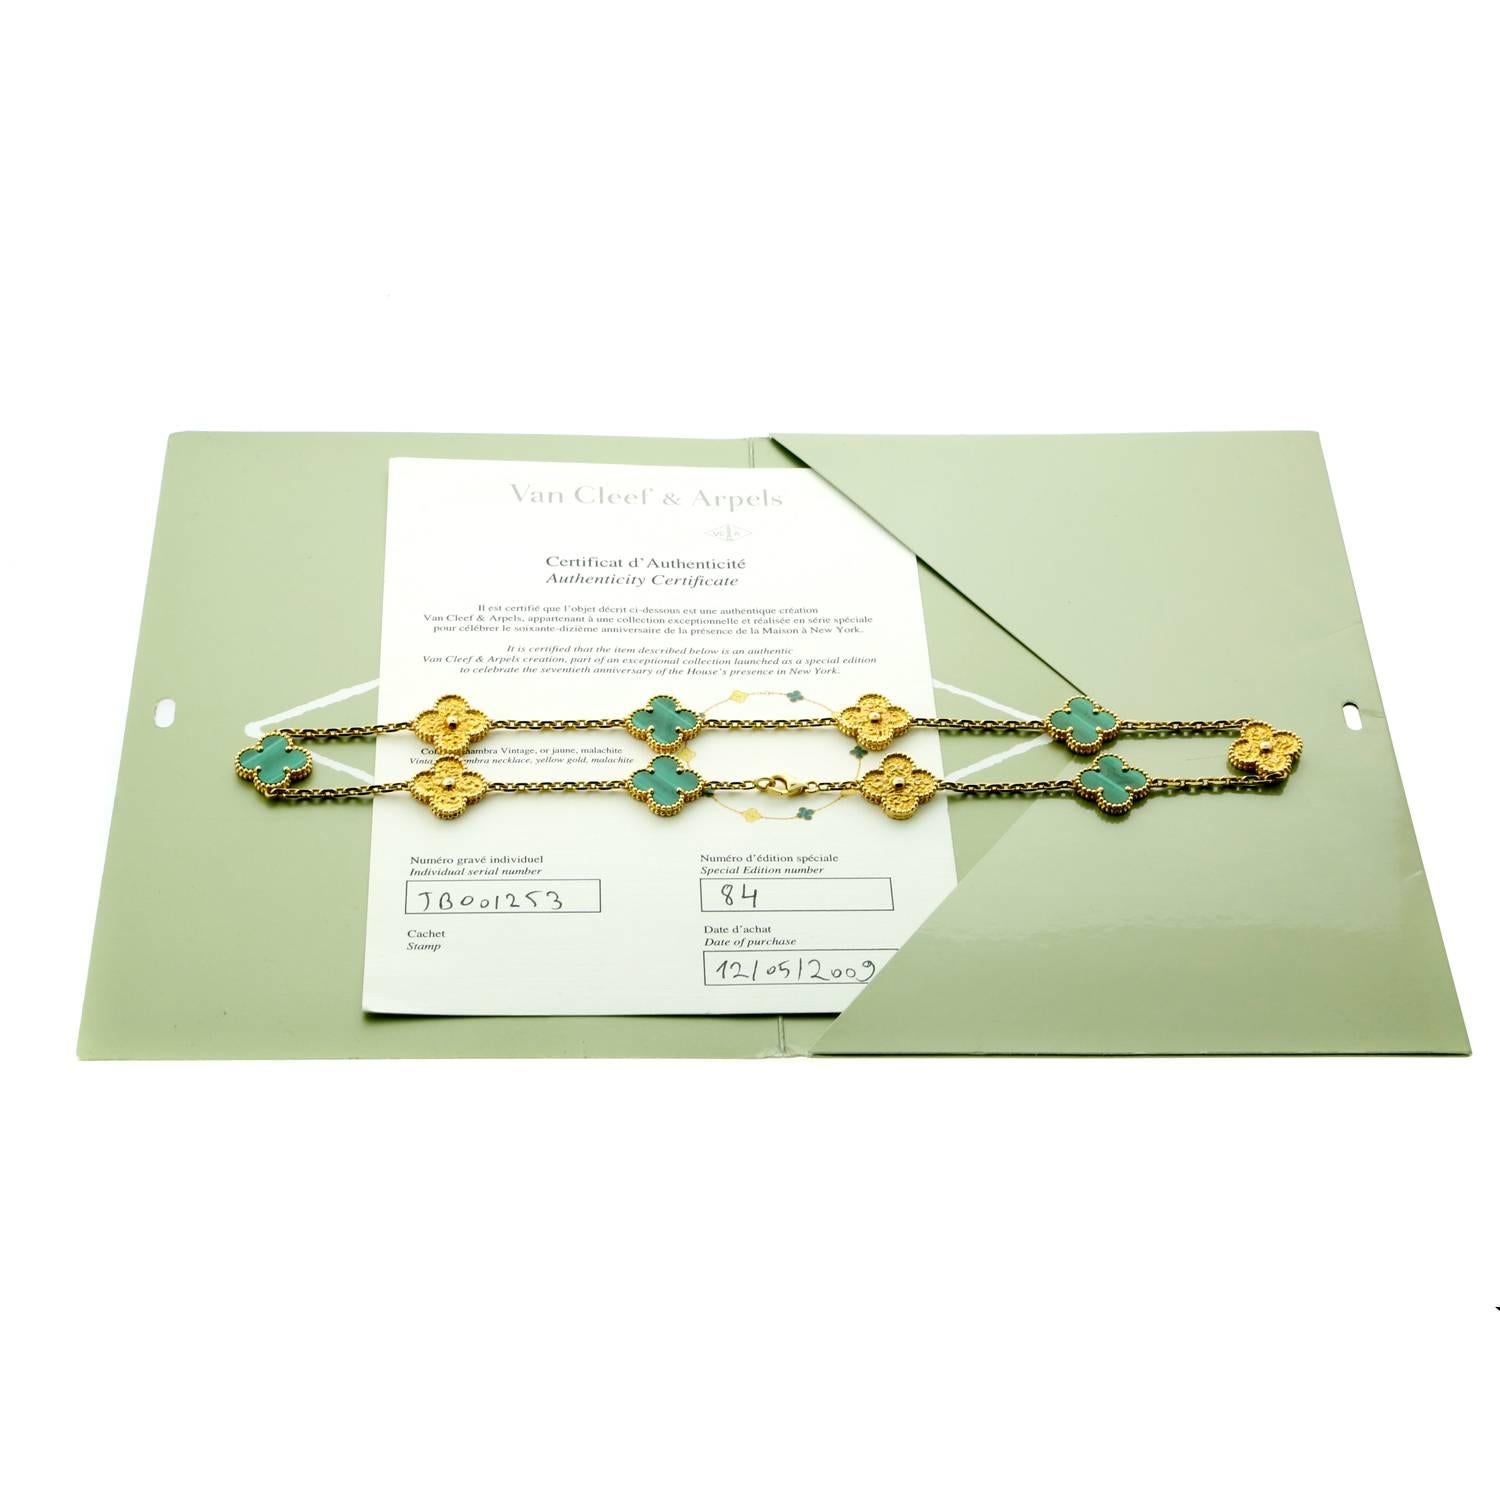 A set of Van Cleef Arpels limited edition Malachite necklaces, only 100 of these rare necklaces were produced and have sold out immediately. 

The motifs measure 15mm each

These two necklaces come with the original Van Cleef & Arpels certificates.